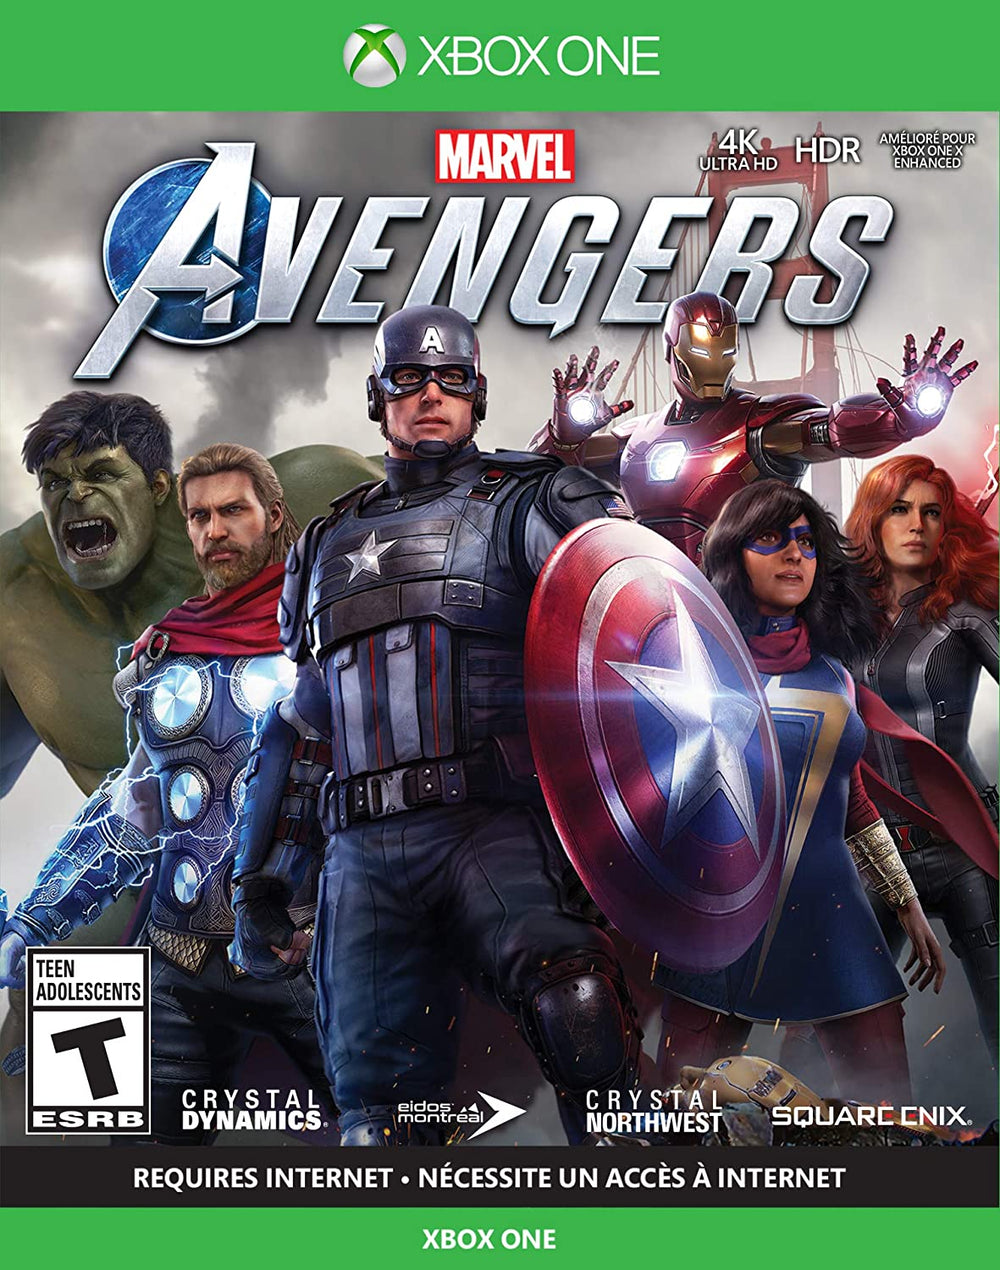 Marvels Avengers for Xbox One